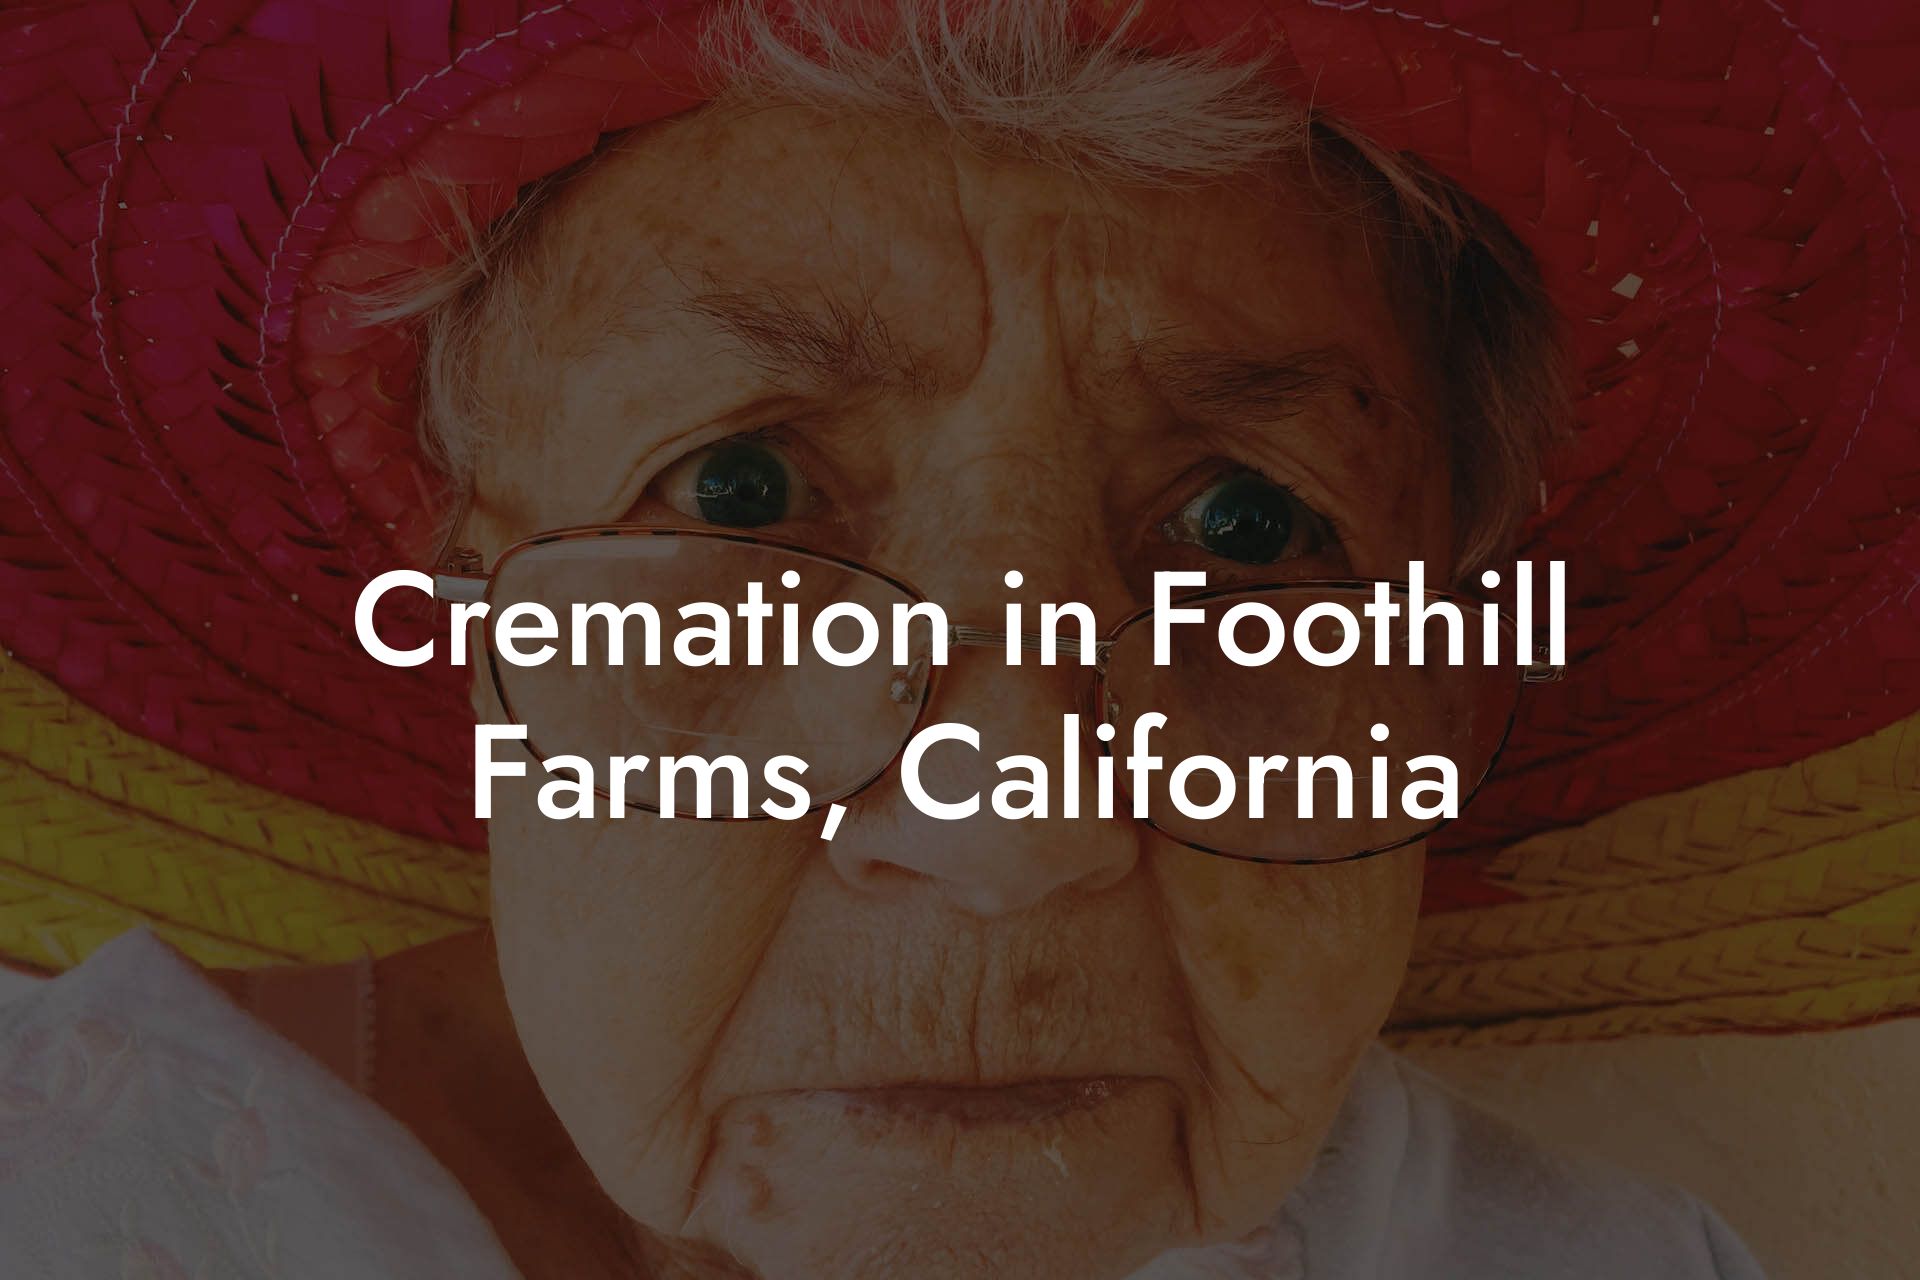 Cremation in Foothill Farms, California